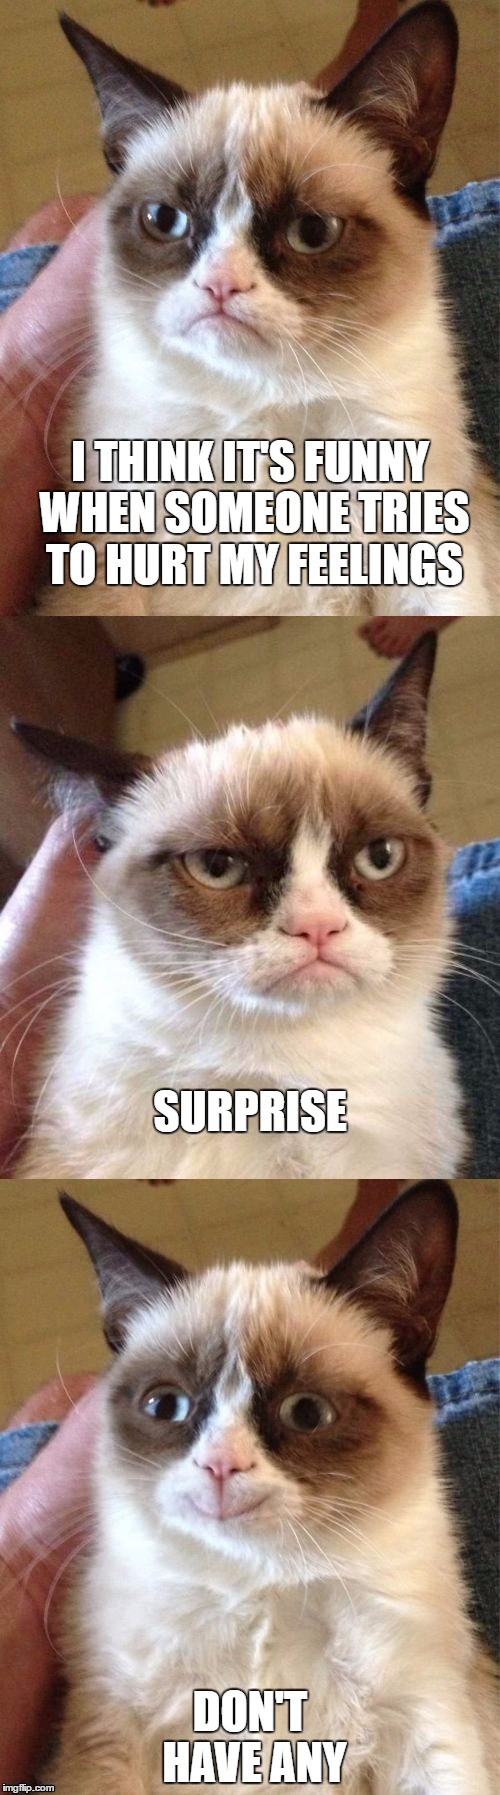 Bad Pun Grumpy Cat | I THINK IT'S FUNNY WHEN SOMEONE TRIES TO HURT MY FEELINGS; SURPRISE; DON'T HAVE ANY | image tagged in bad pun grumpy cat,random | made w/ Imgflip meme maker